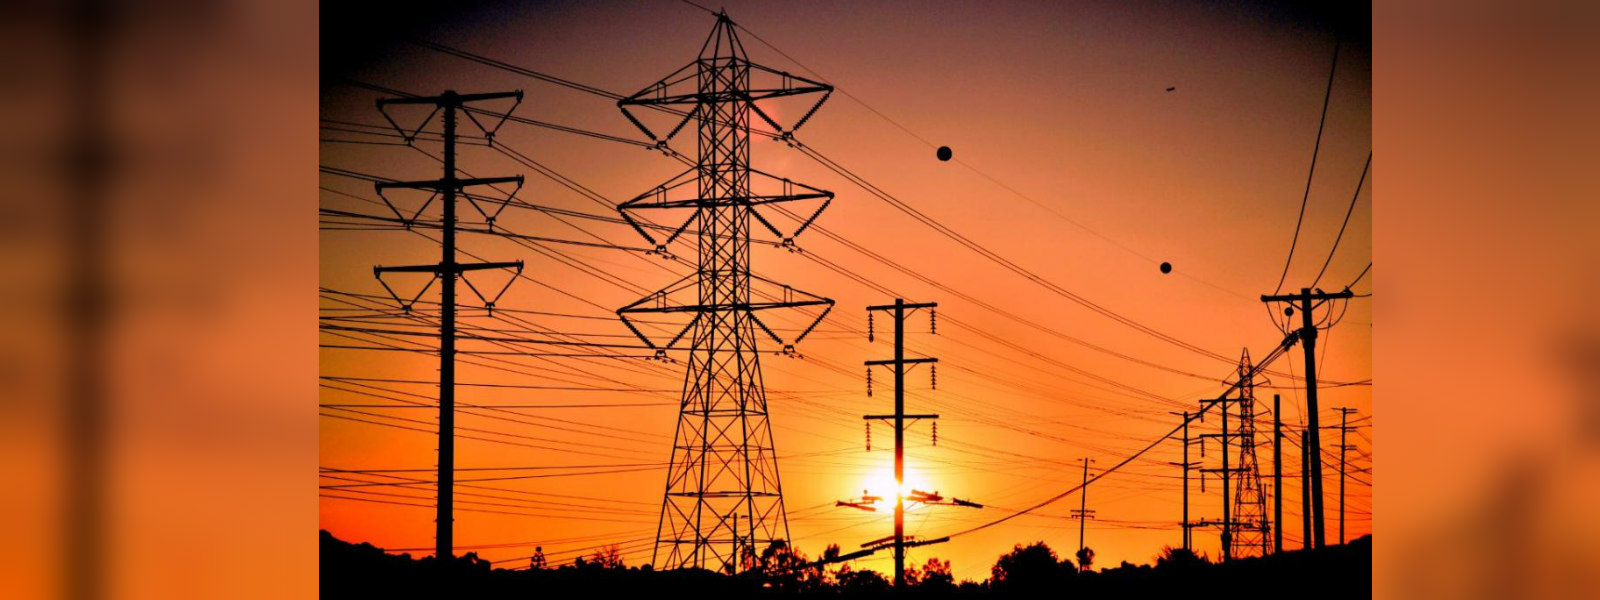 Final decision on future power cuts on Tuesday (15)